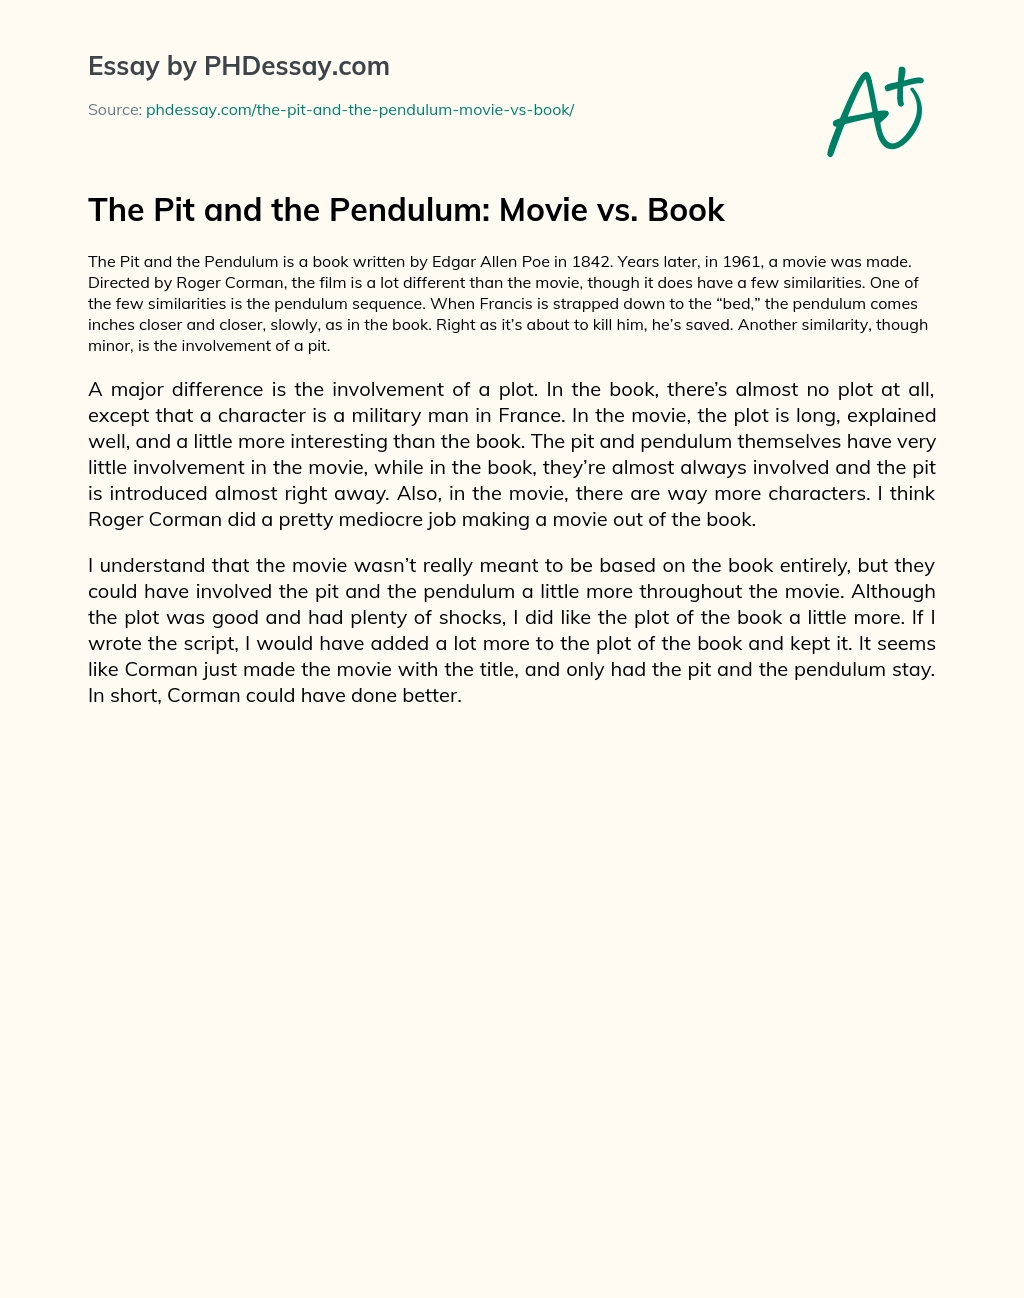 The Pit and the Pendulum: Movie vs. Book essay